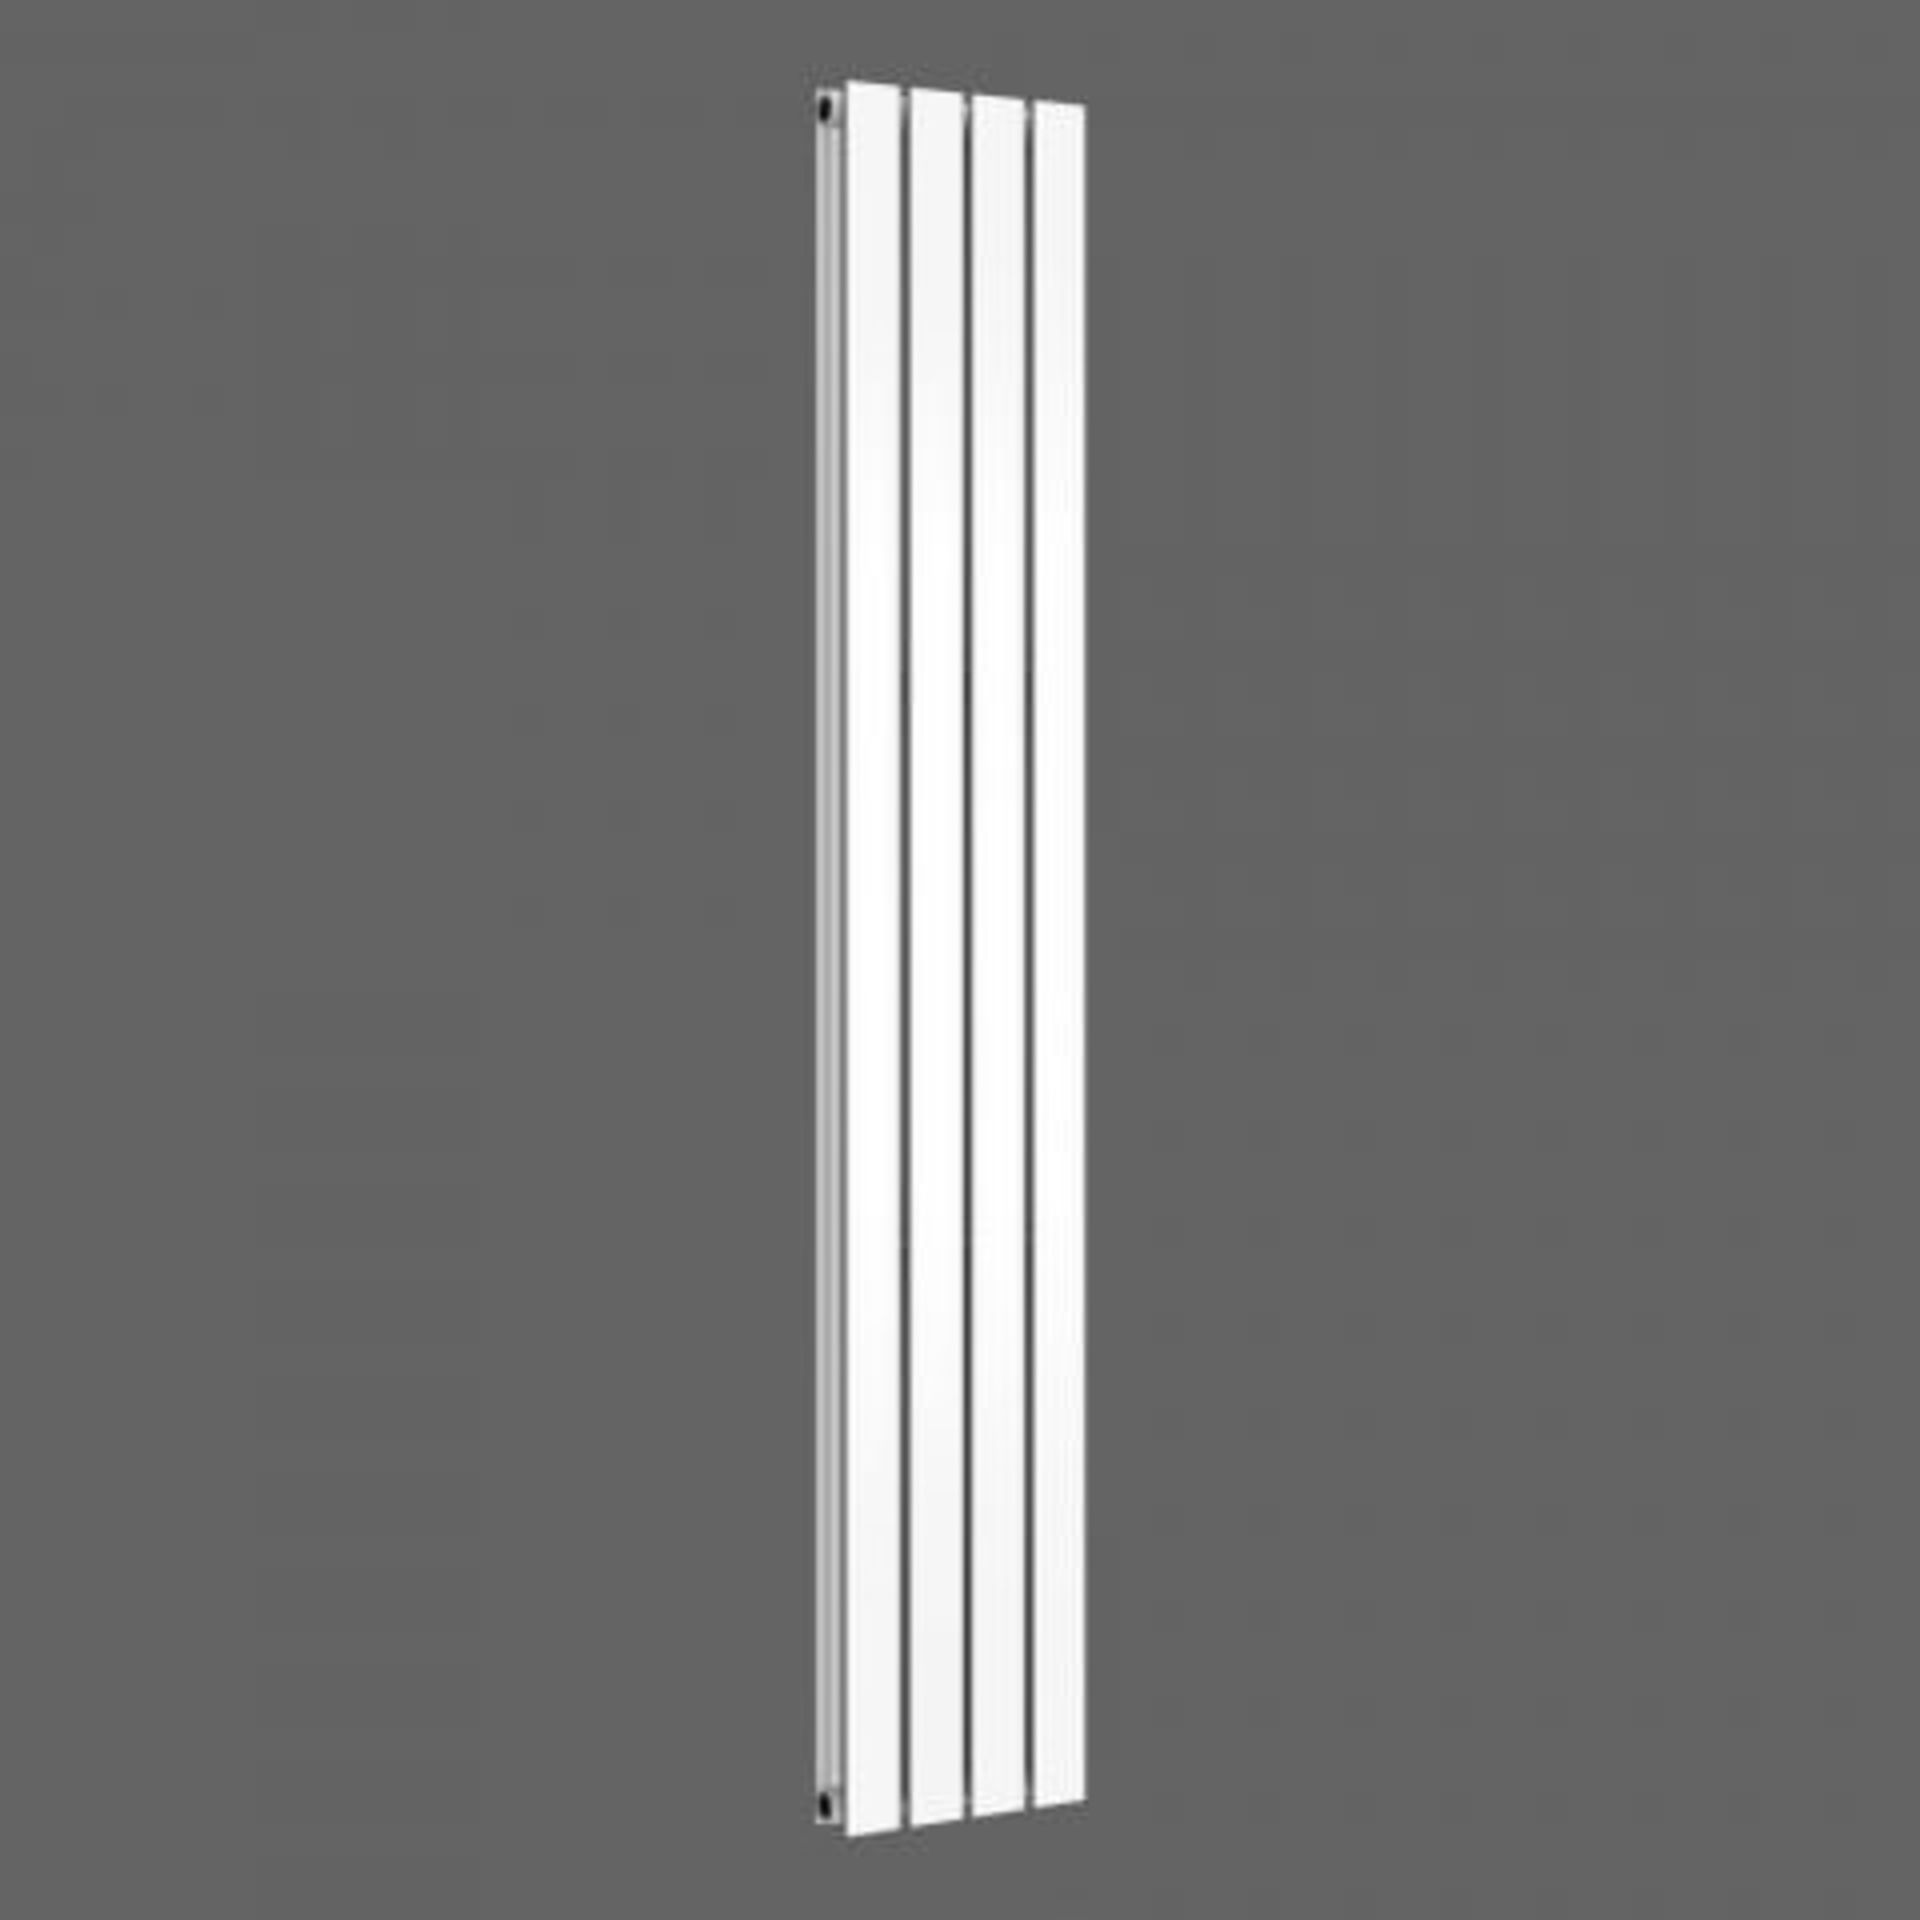 (T24) 1800x300mm Gloss White Double Flat Panel Vertical Radiator RRP £194.99 Attention to detail - Image 3 of 3